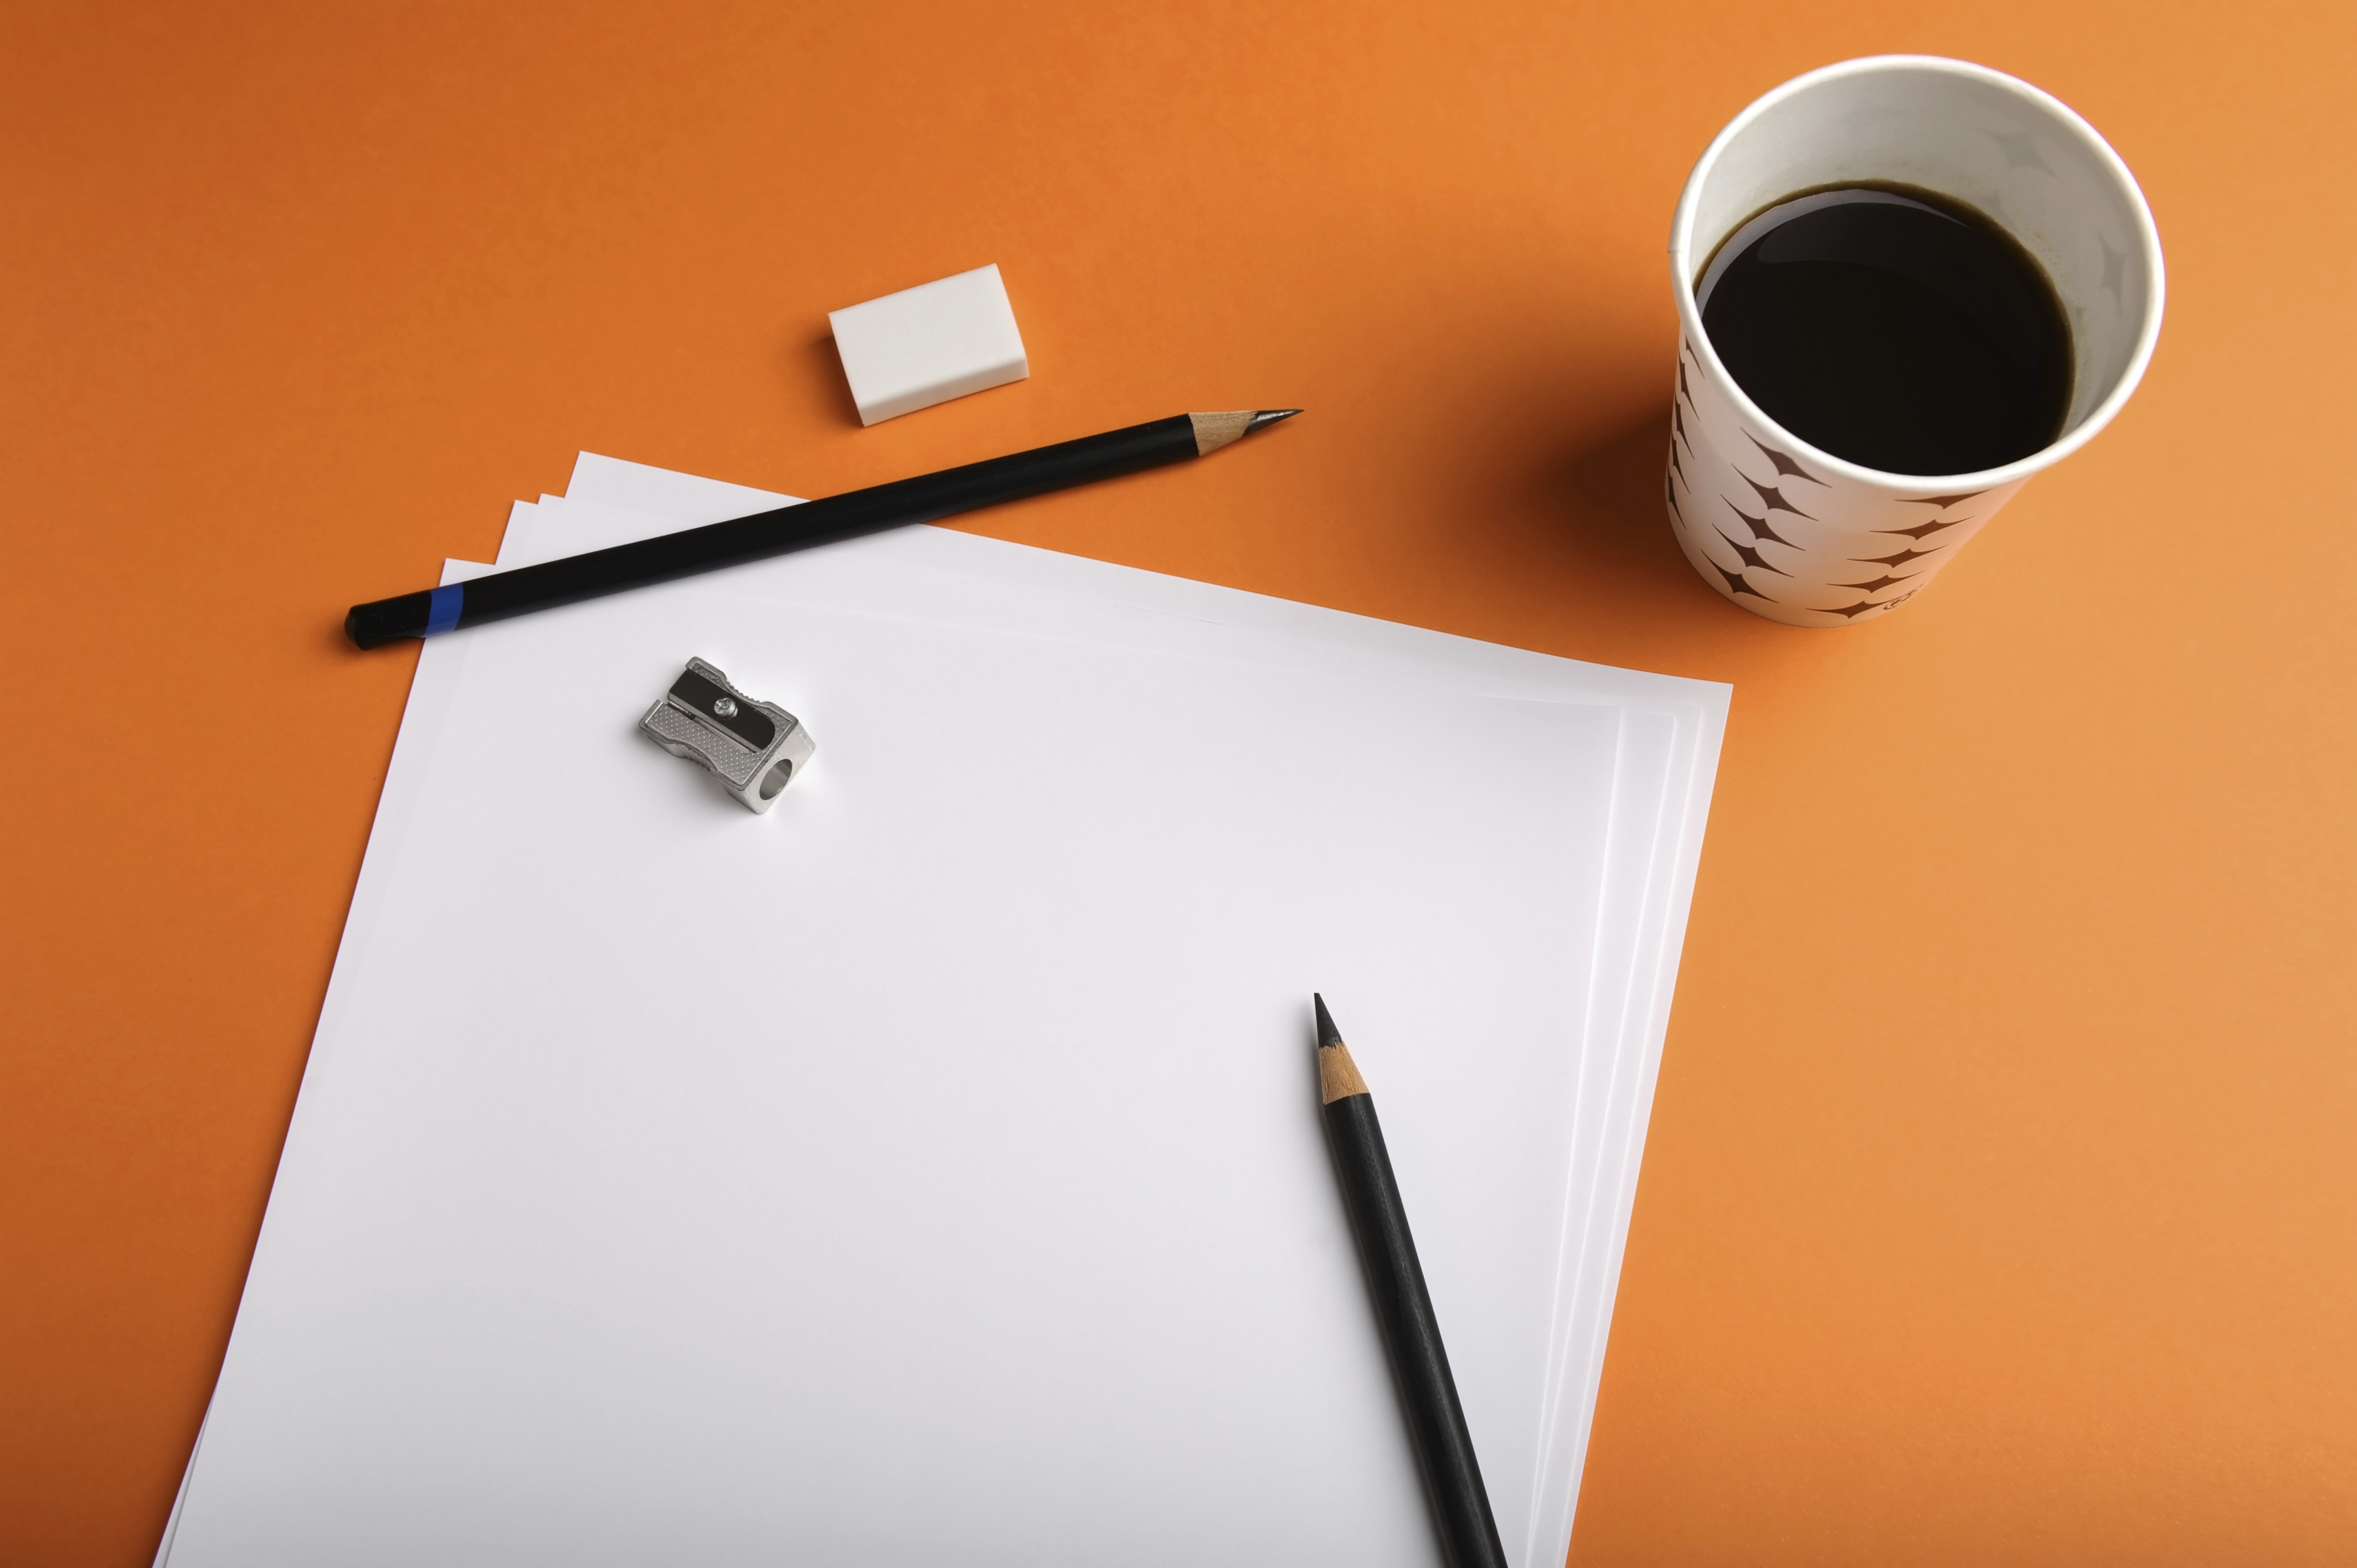 Paper and pencil sit on an orange background next to a full coffee cup